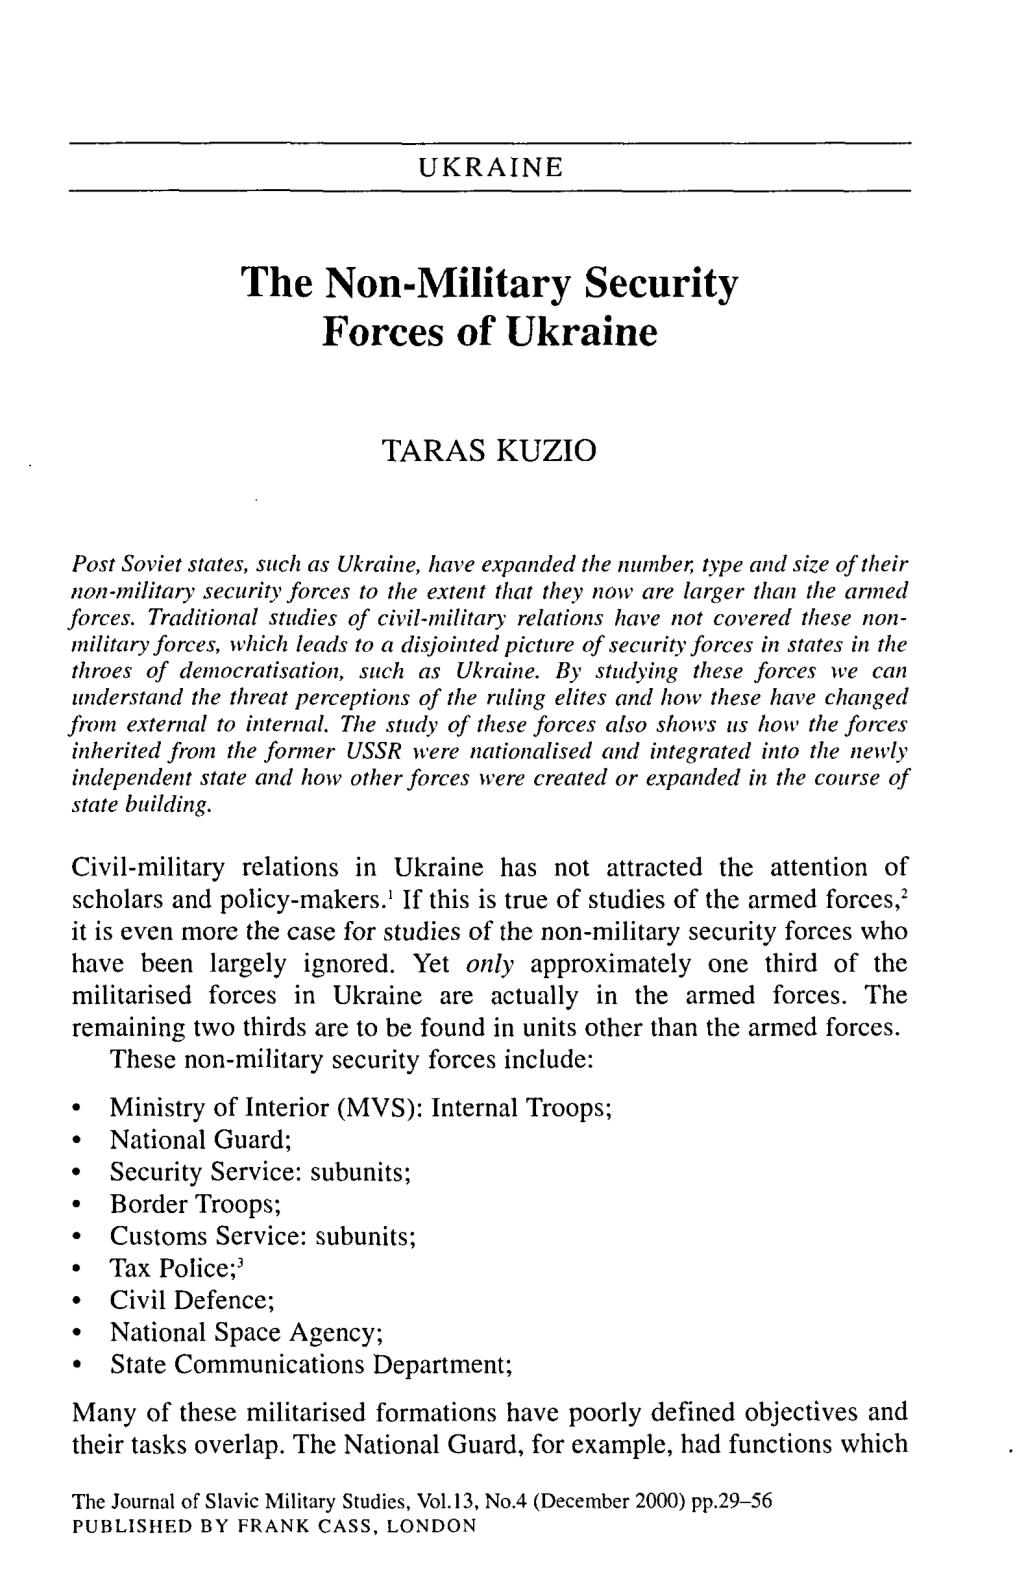 The Non-Military Security Forces of Ukraine